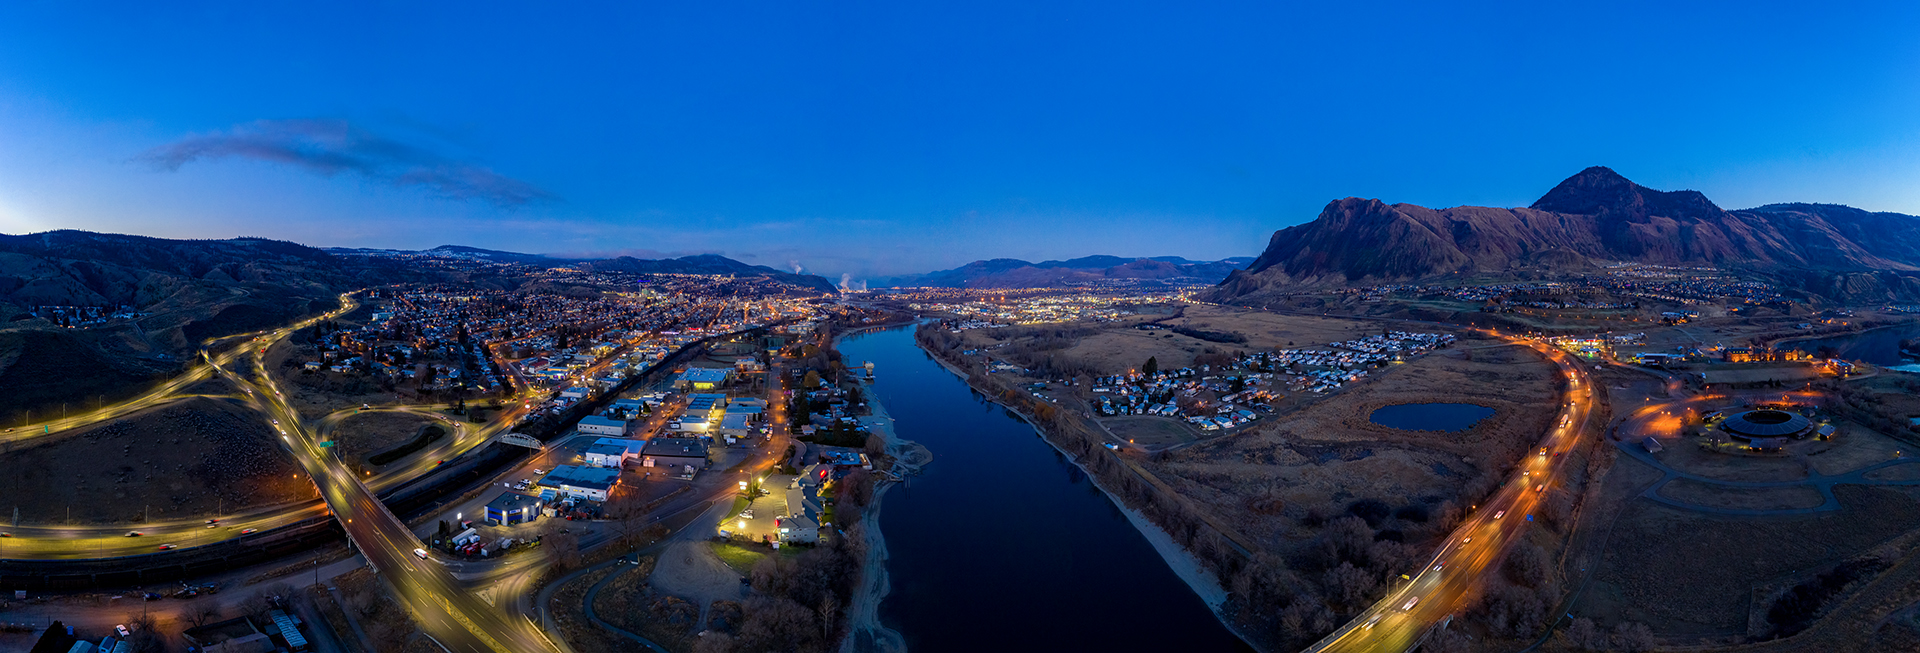 Kamloops City Aerial river and mountains and lights from the city